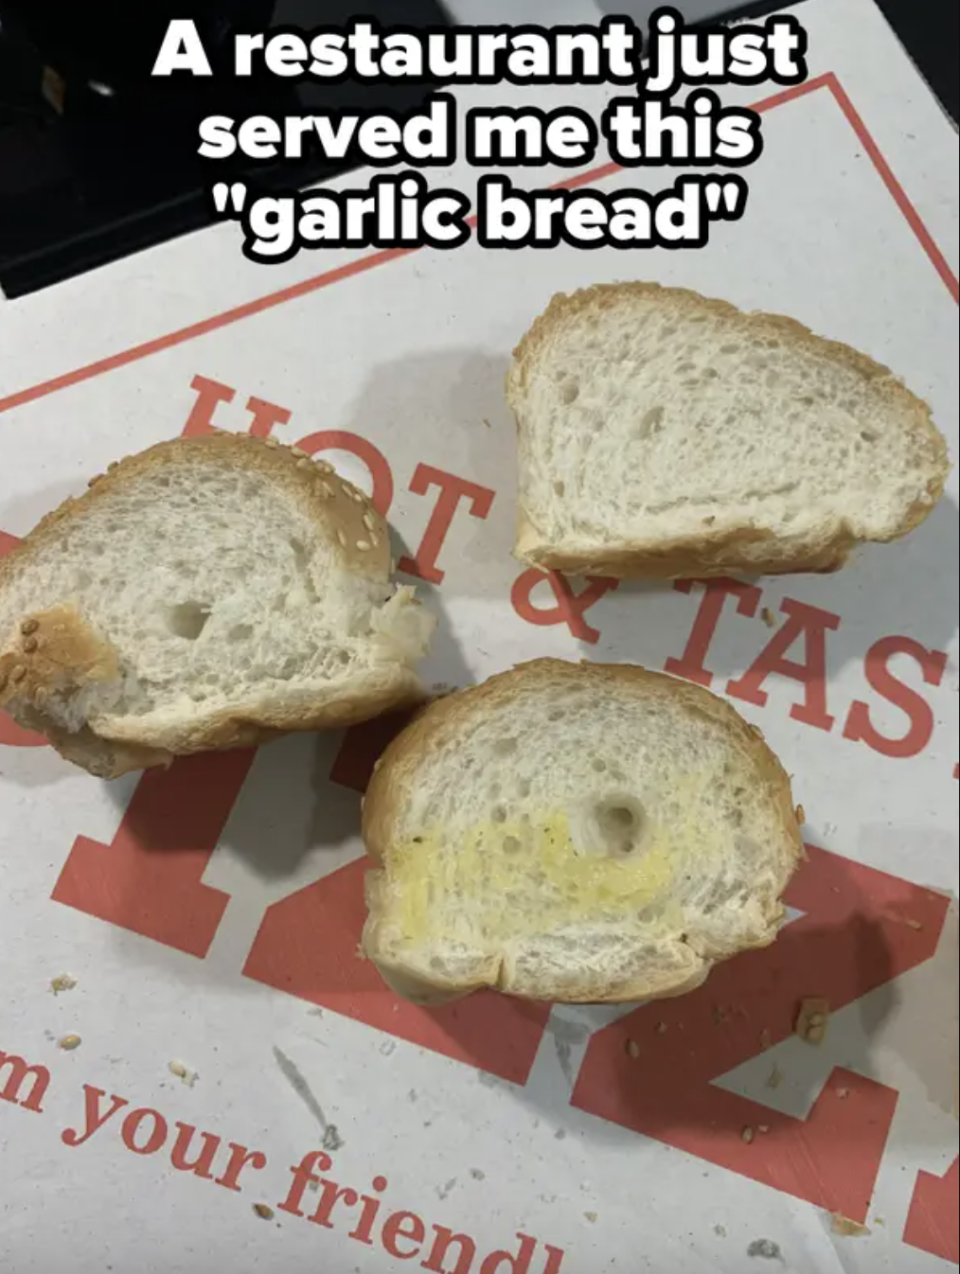 Three pieces of plain bread with faint butter marks labeled as "garlic bread" on a takeaway pizza box with some text